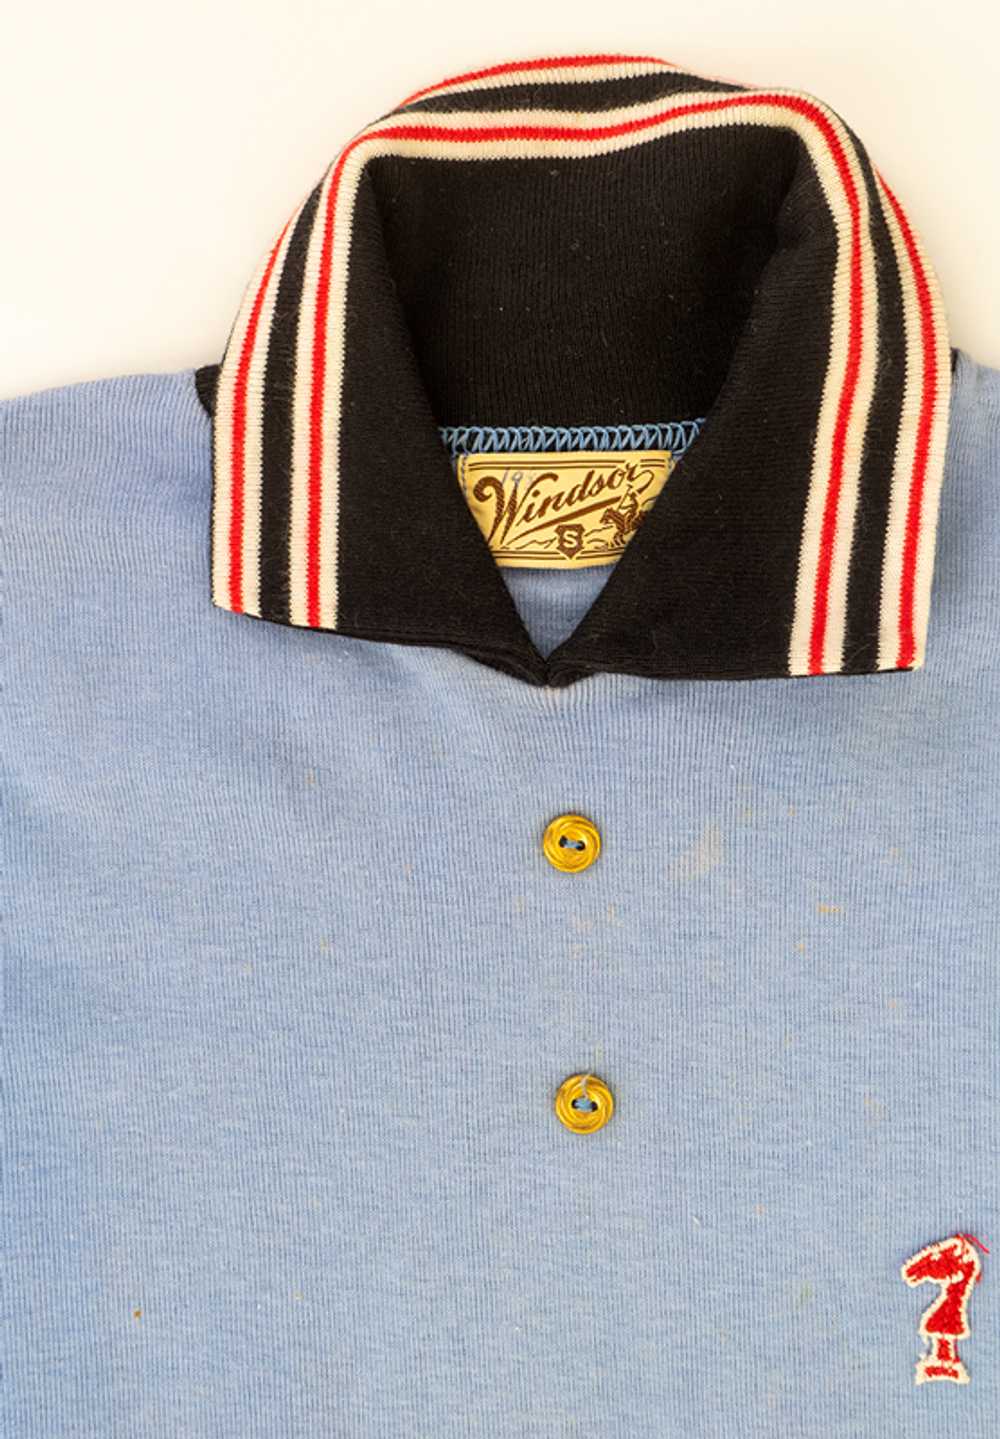 1950s Jersey Knit Polo - image 2